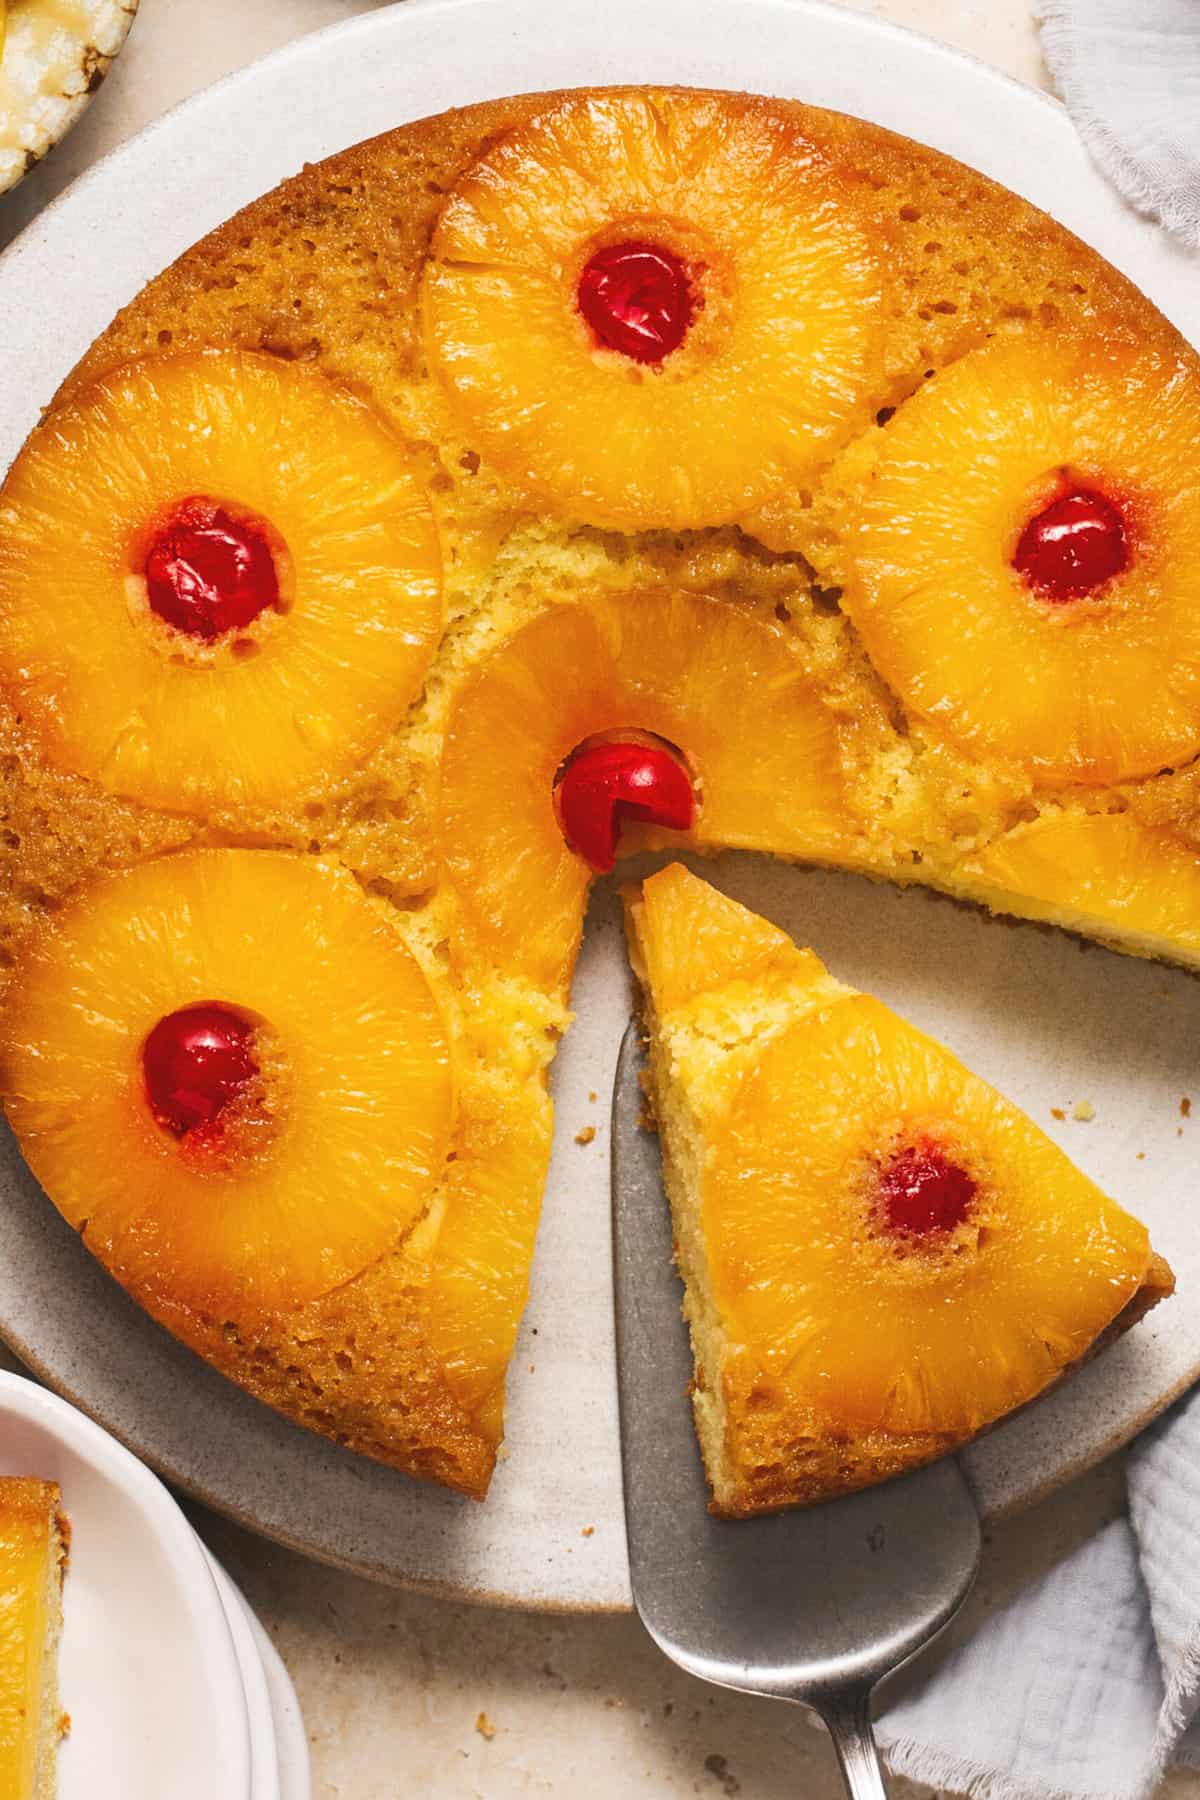 The Absolute Best Pan For Toasty Pineapple Upside-Down Cakes